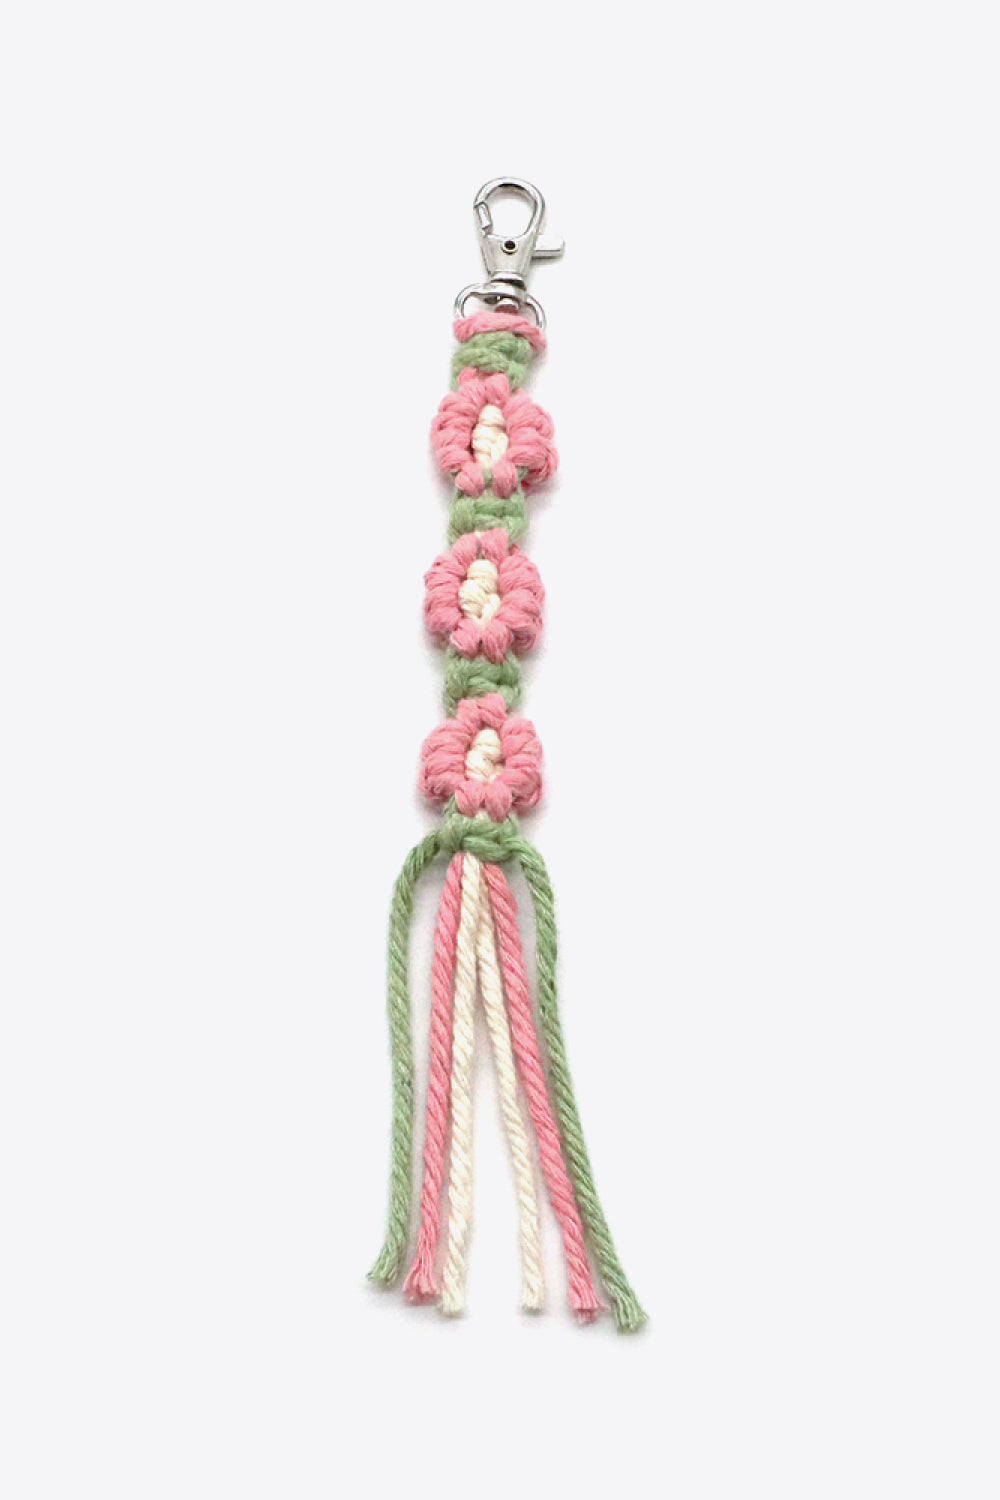 Trendsi Cupid Beauty Supplies Blush Pink / One Size Keychains 4-Pack Hand-Woven Flower Keychain, Color Varies